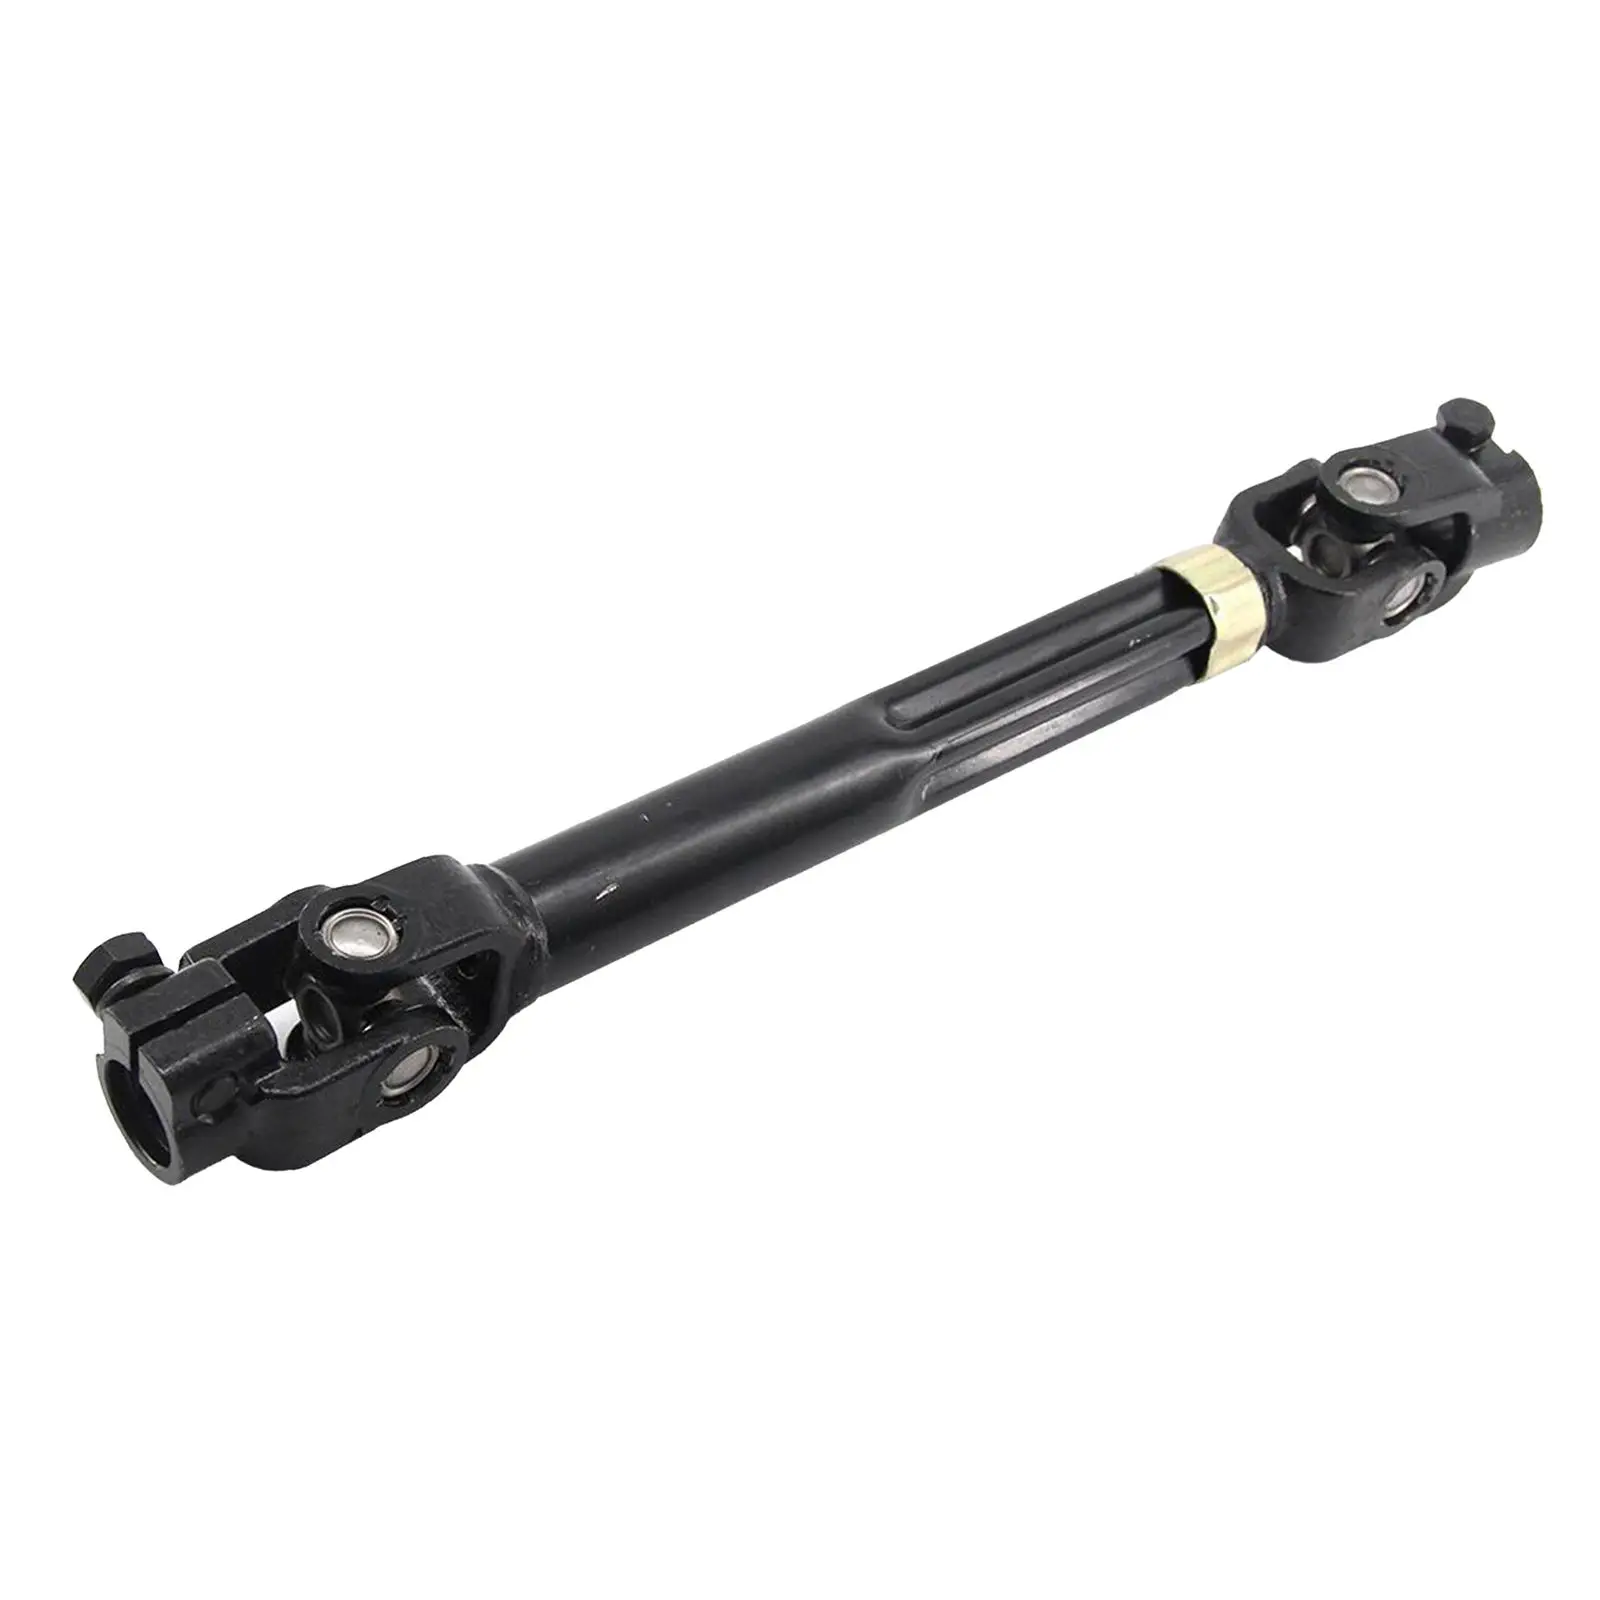 Steering Column Lower Intermediate Steering Shaft with U-Joint Coupler Replacement for 04-08 Ford F-150